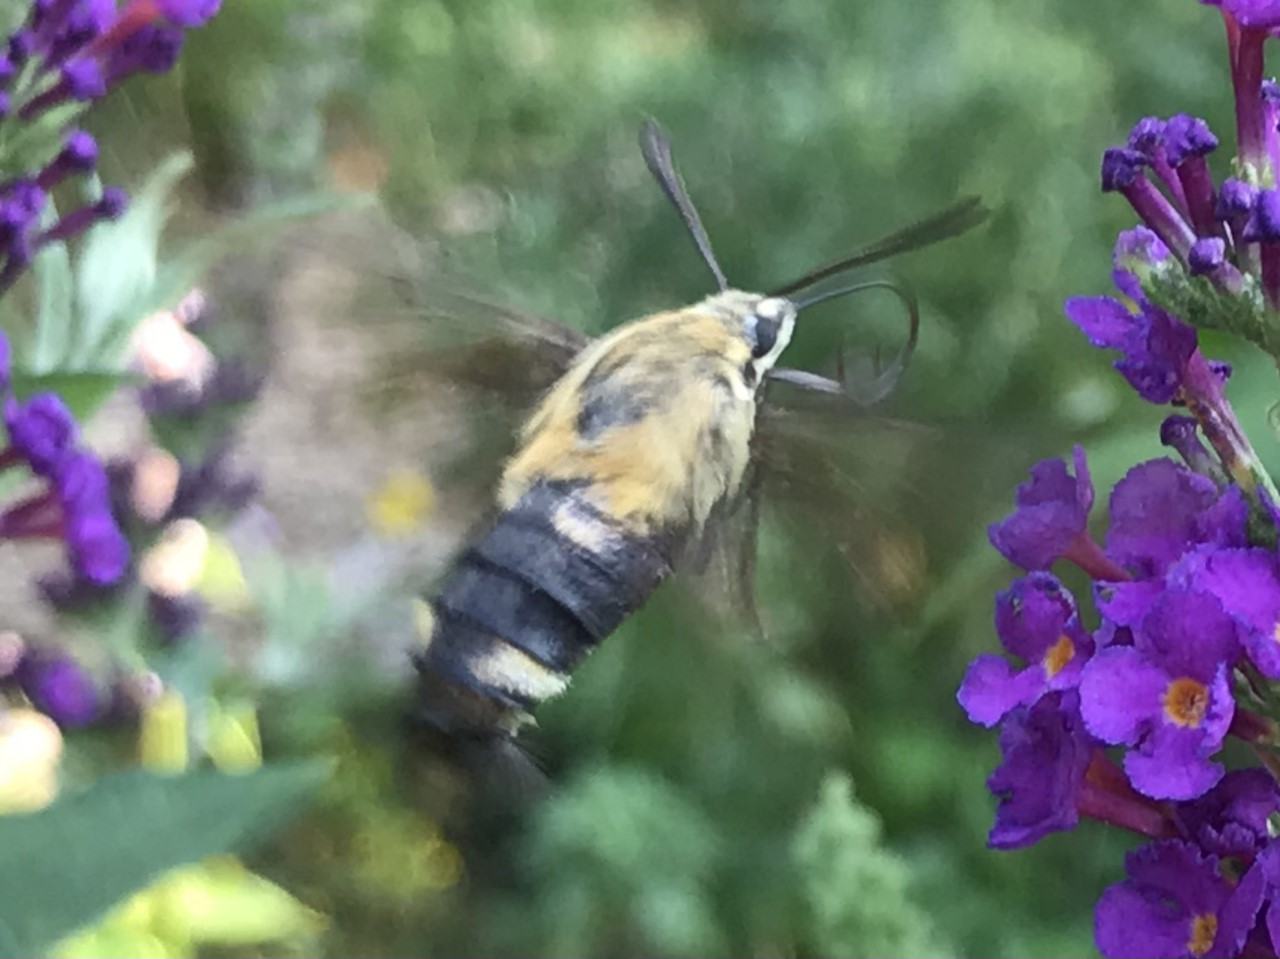 Snowberry Clearwing moth, with wings so fast they are just a blur!